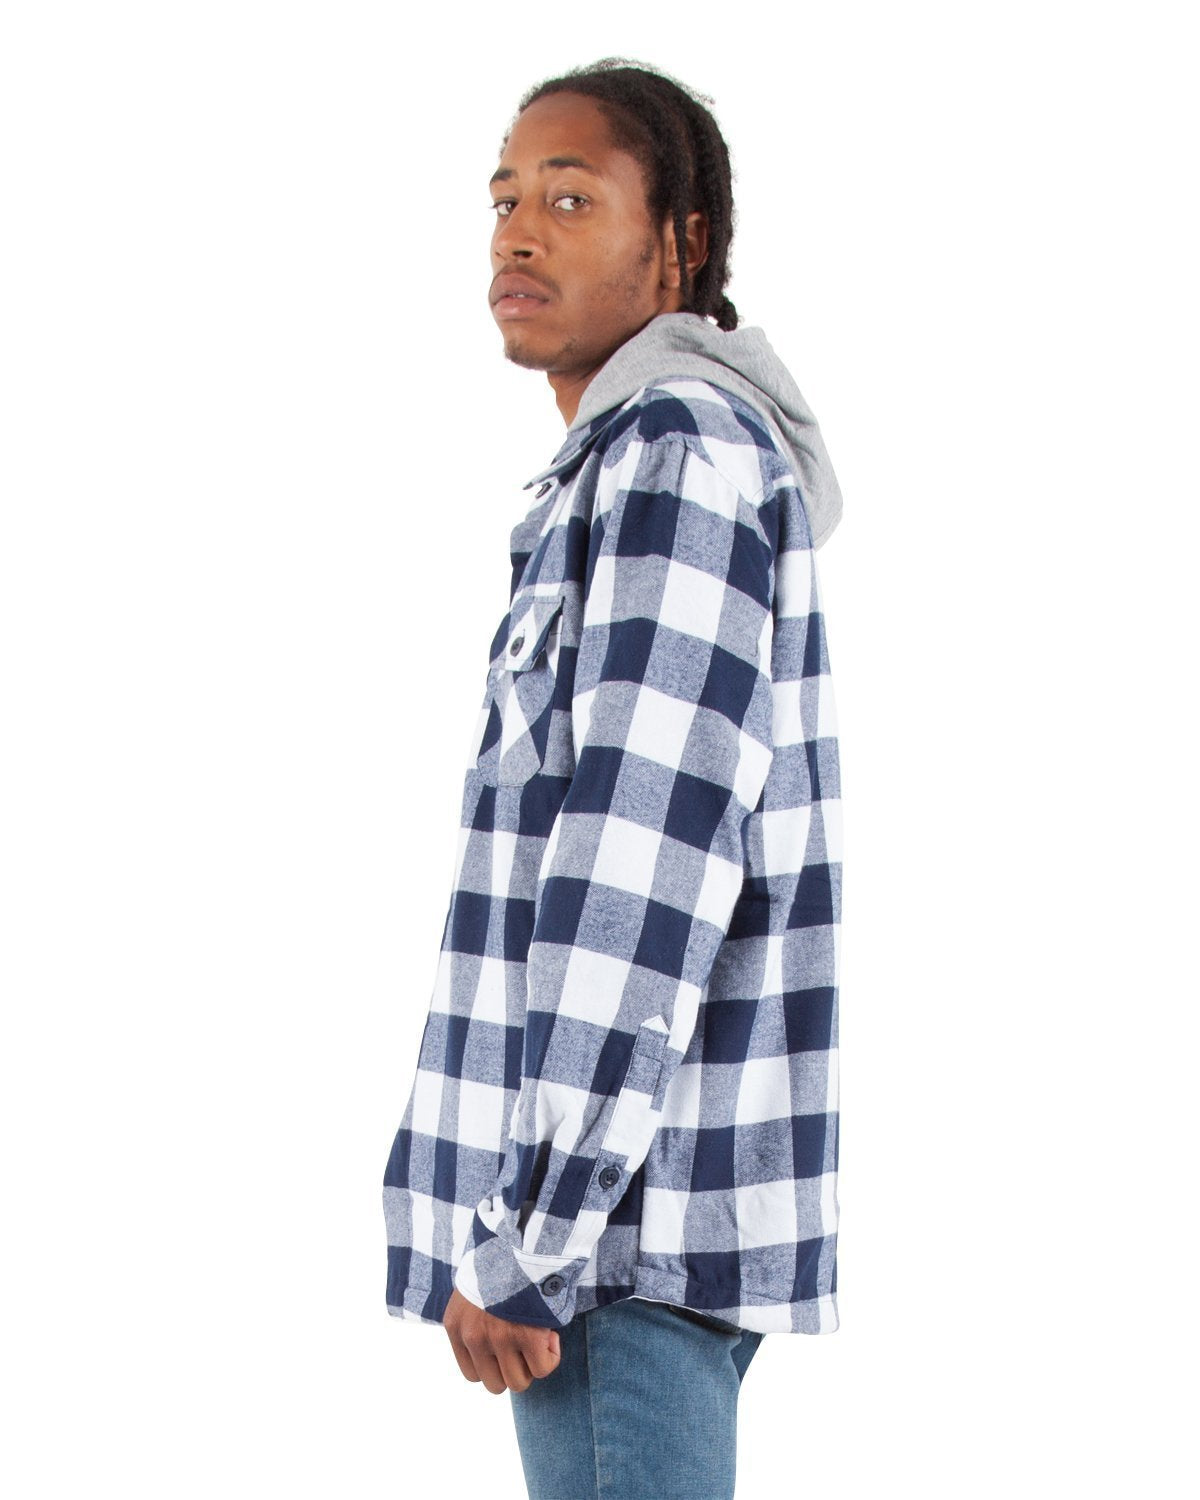 Basecamp Plaid Flannel Jacket Fall Edition 🍁 - The Happy Clothing